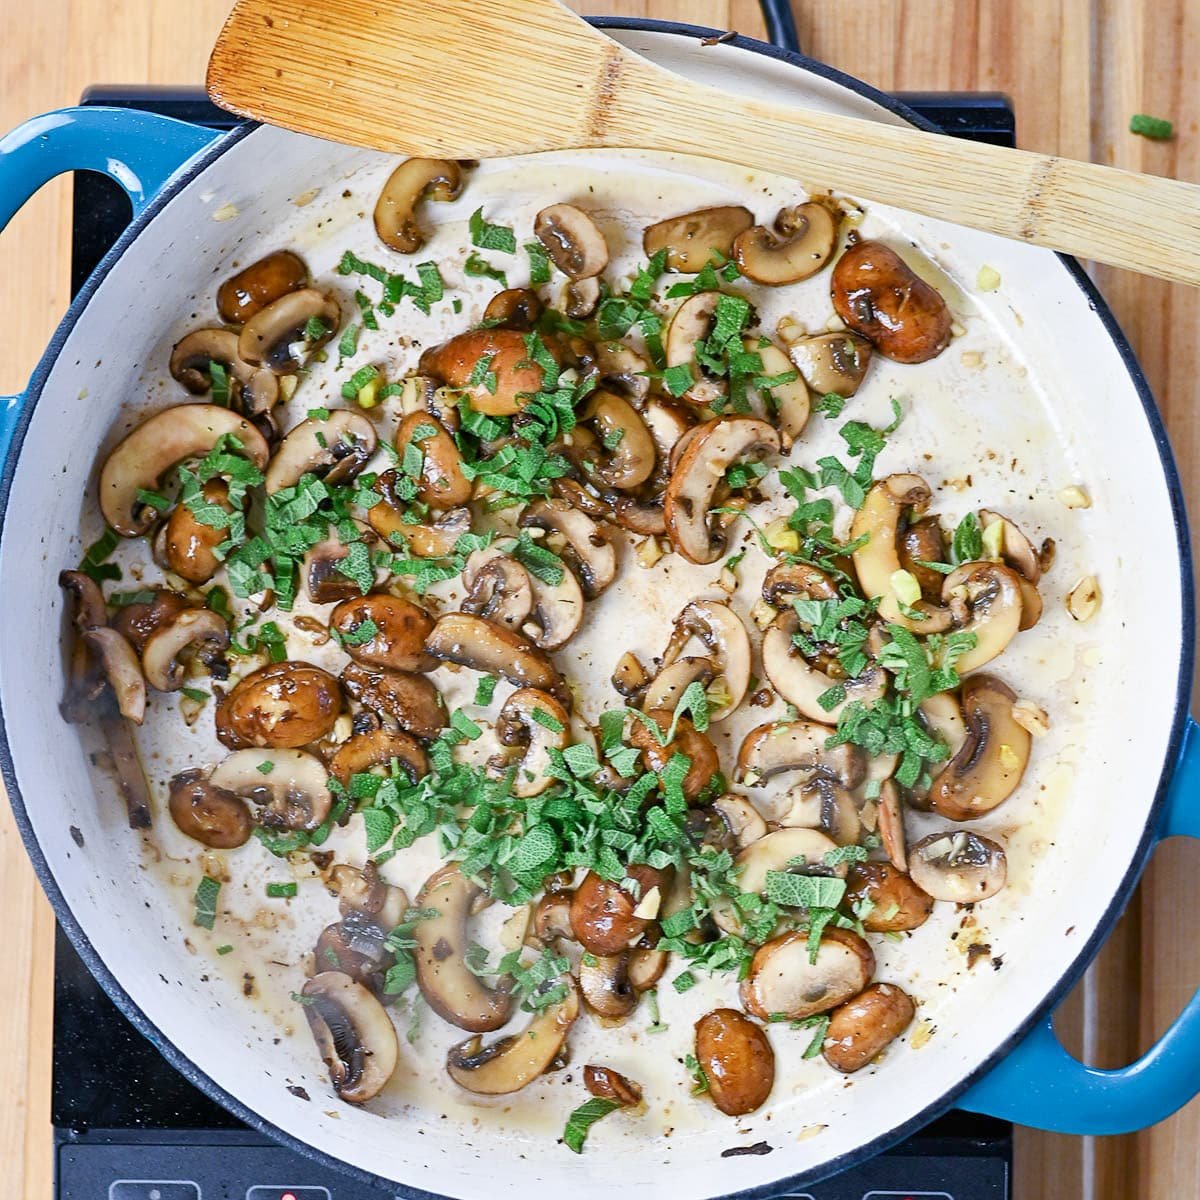 Fresh herbs added to mushroom cooking in a skillet.